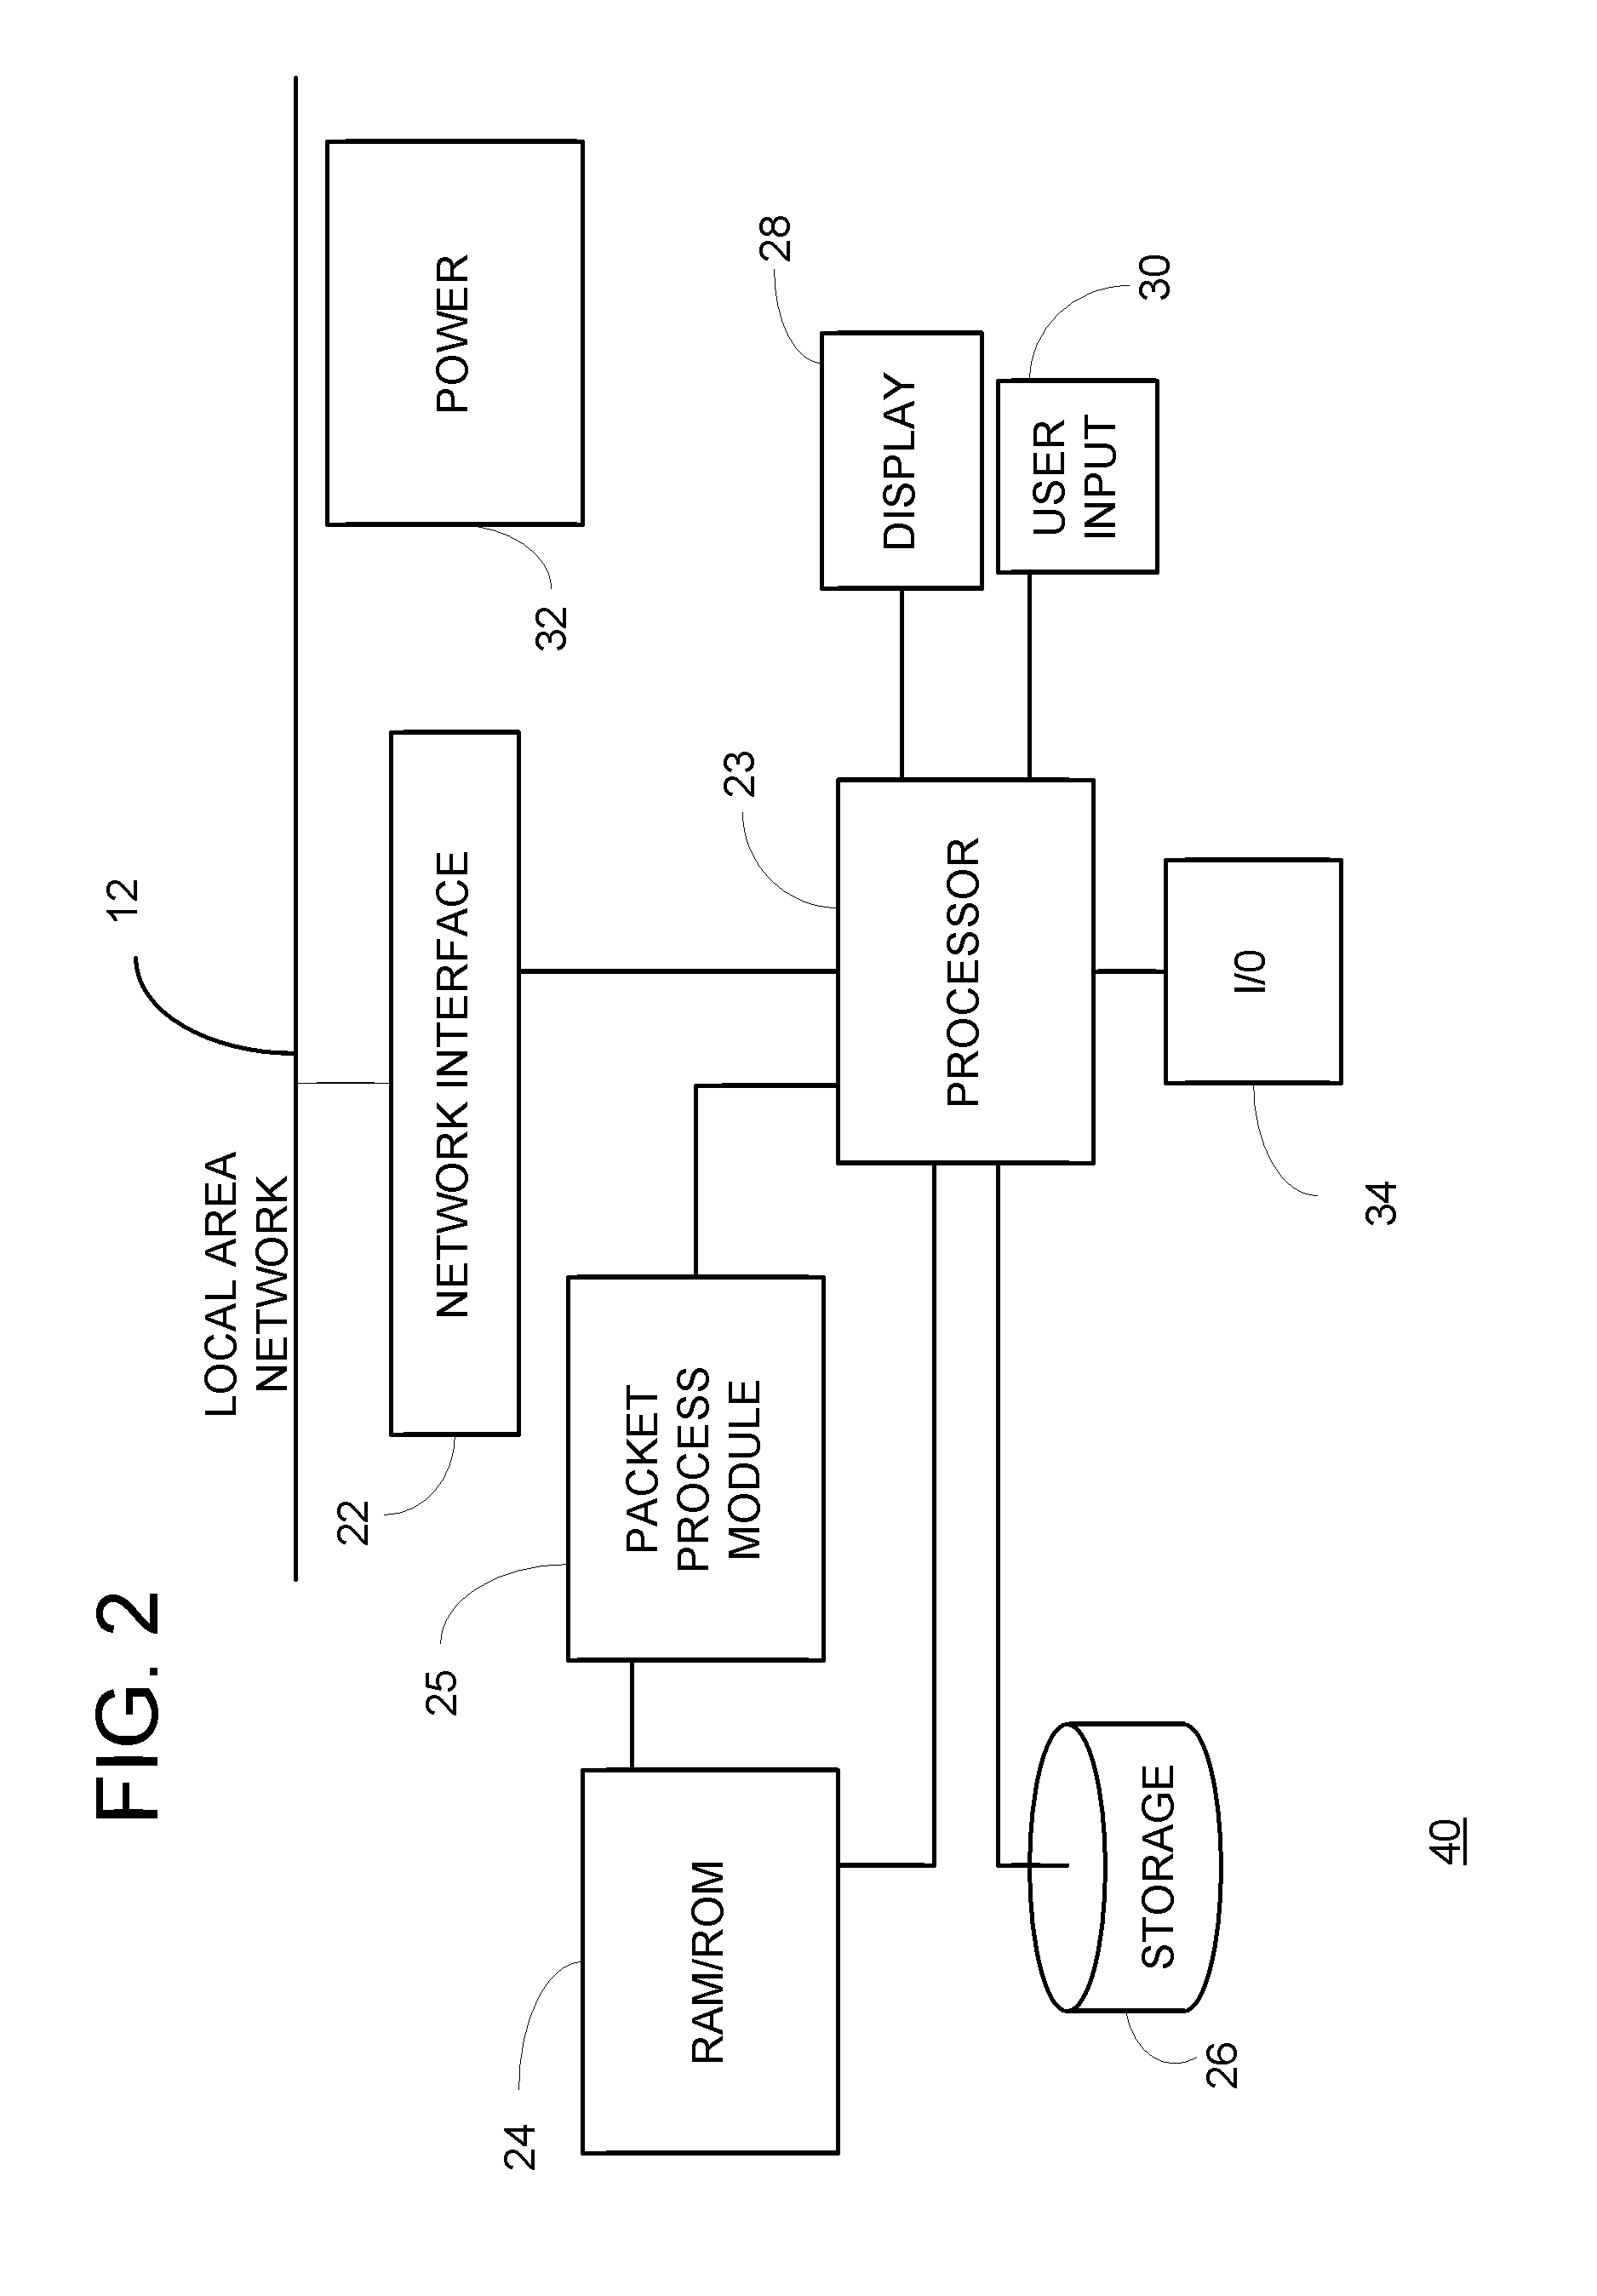 Method and apparatus of duplicate packet detection and discard